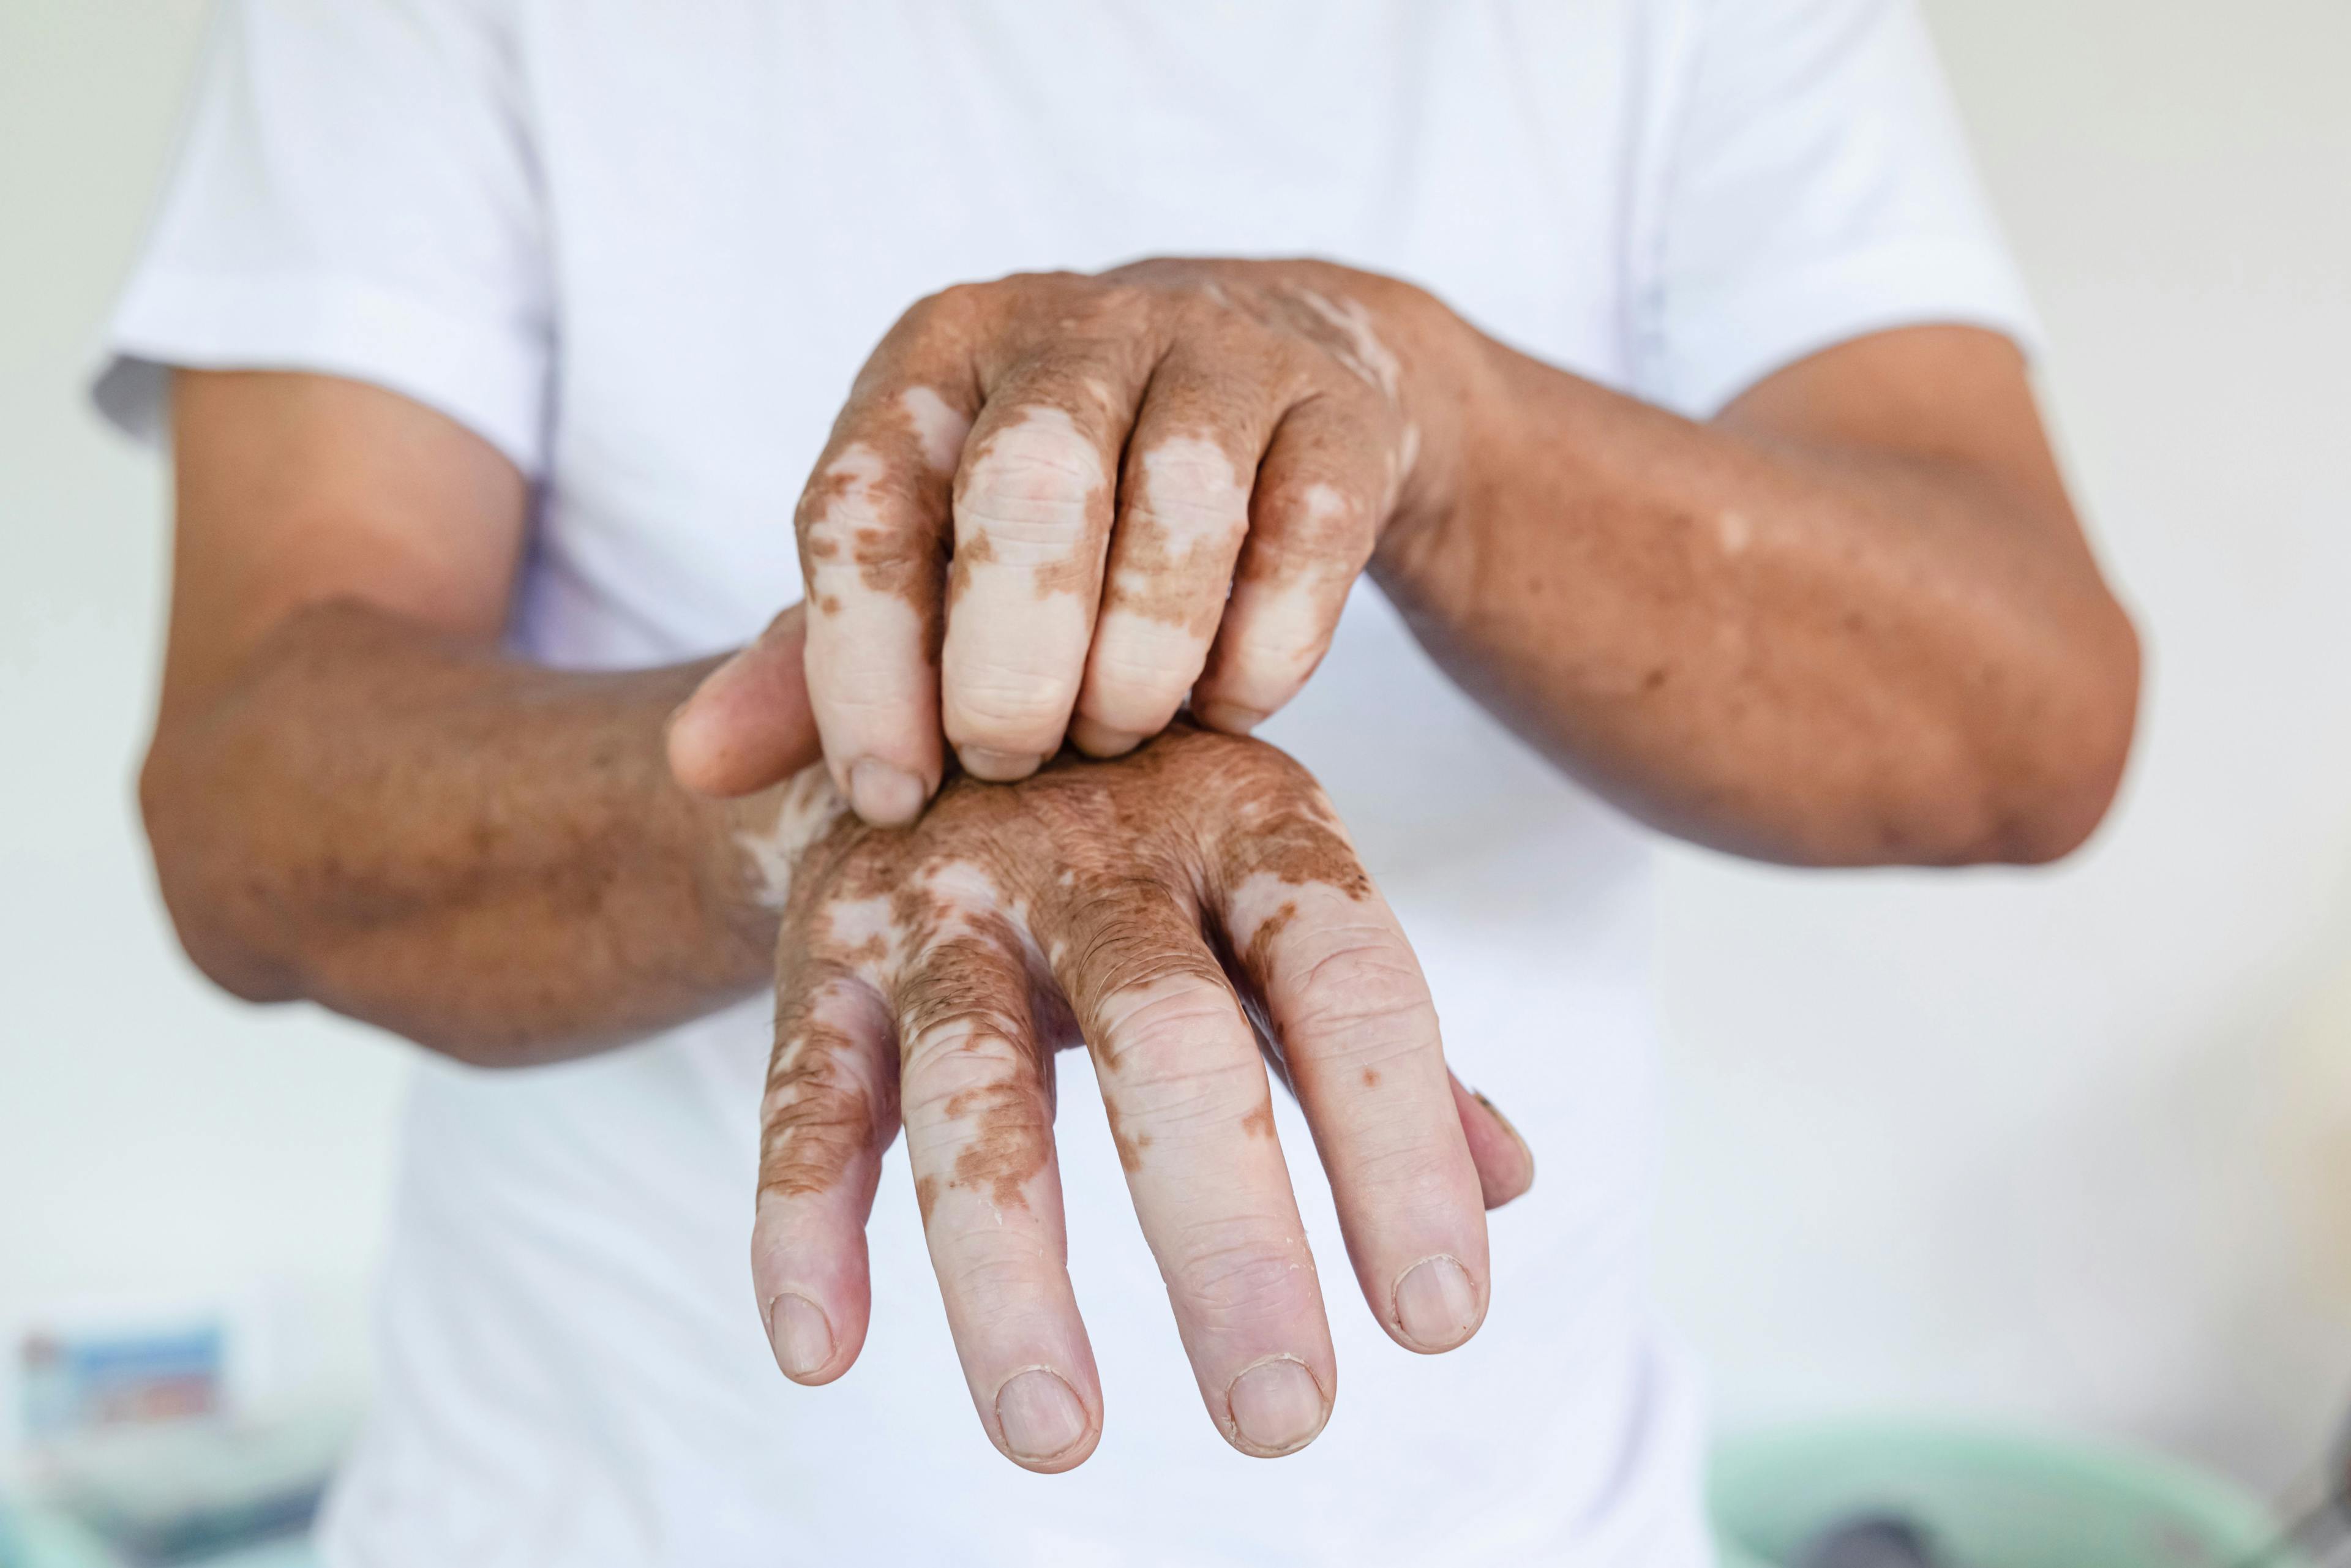 Man with vitiligo on the hands has one hand over the other, scratching it.